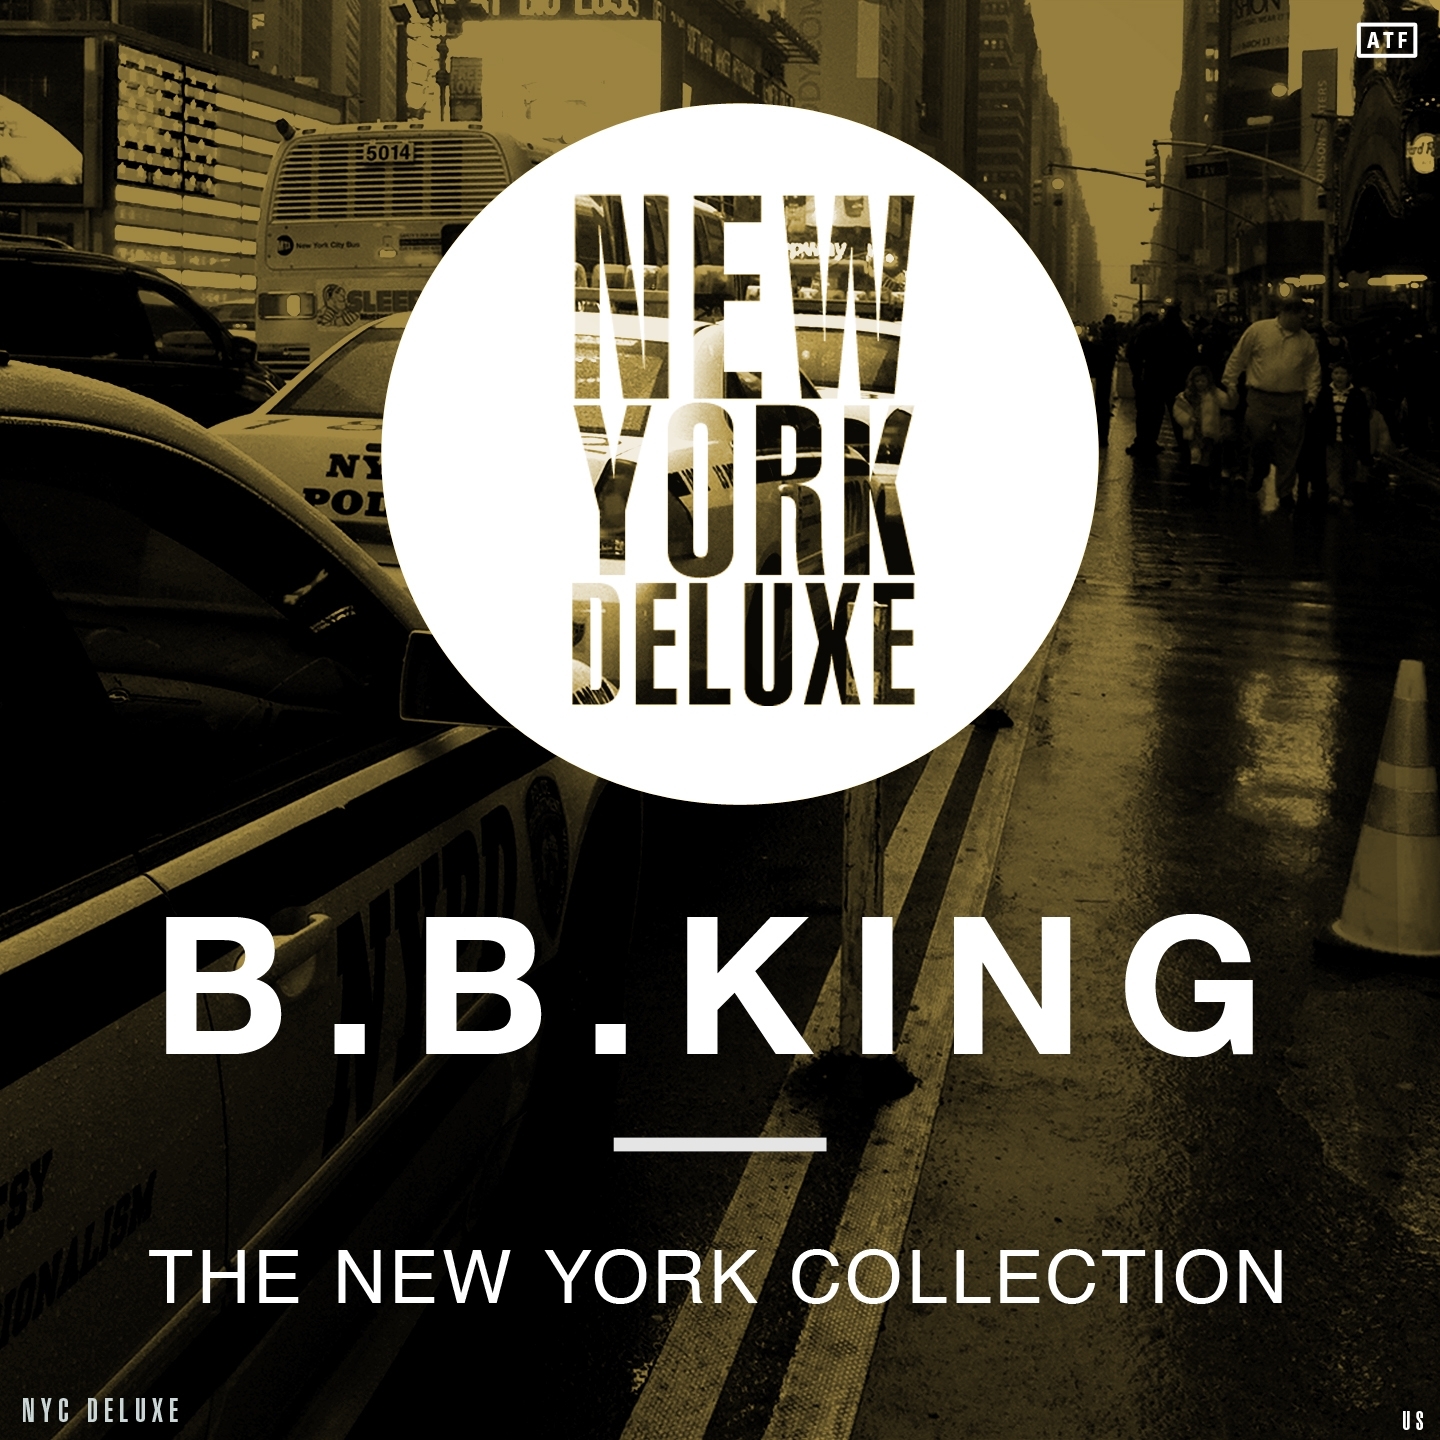 The New York Collection